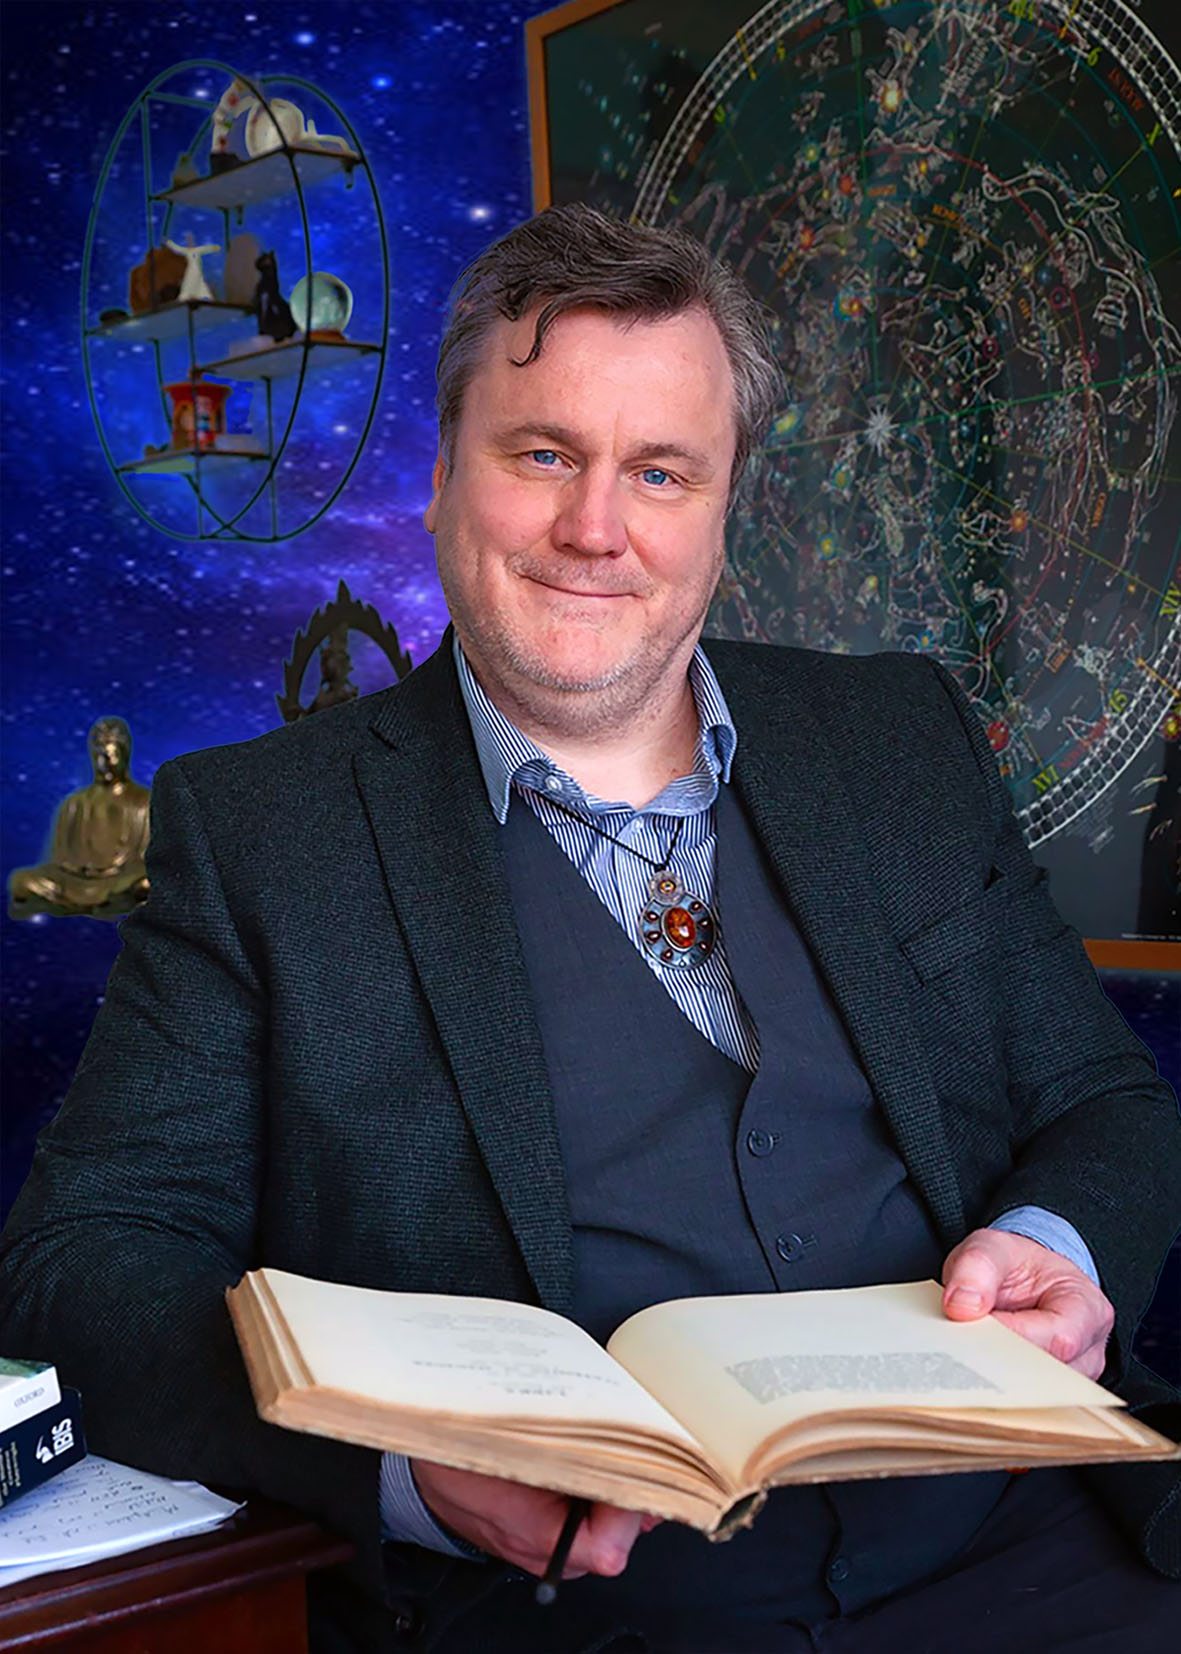 London Astrologer with book open on lap and starry sky background plus a map of the stars on the wall